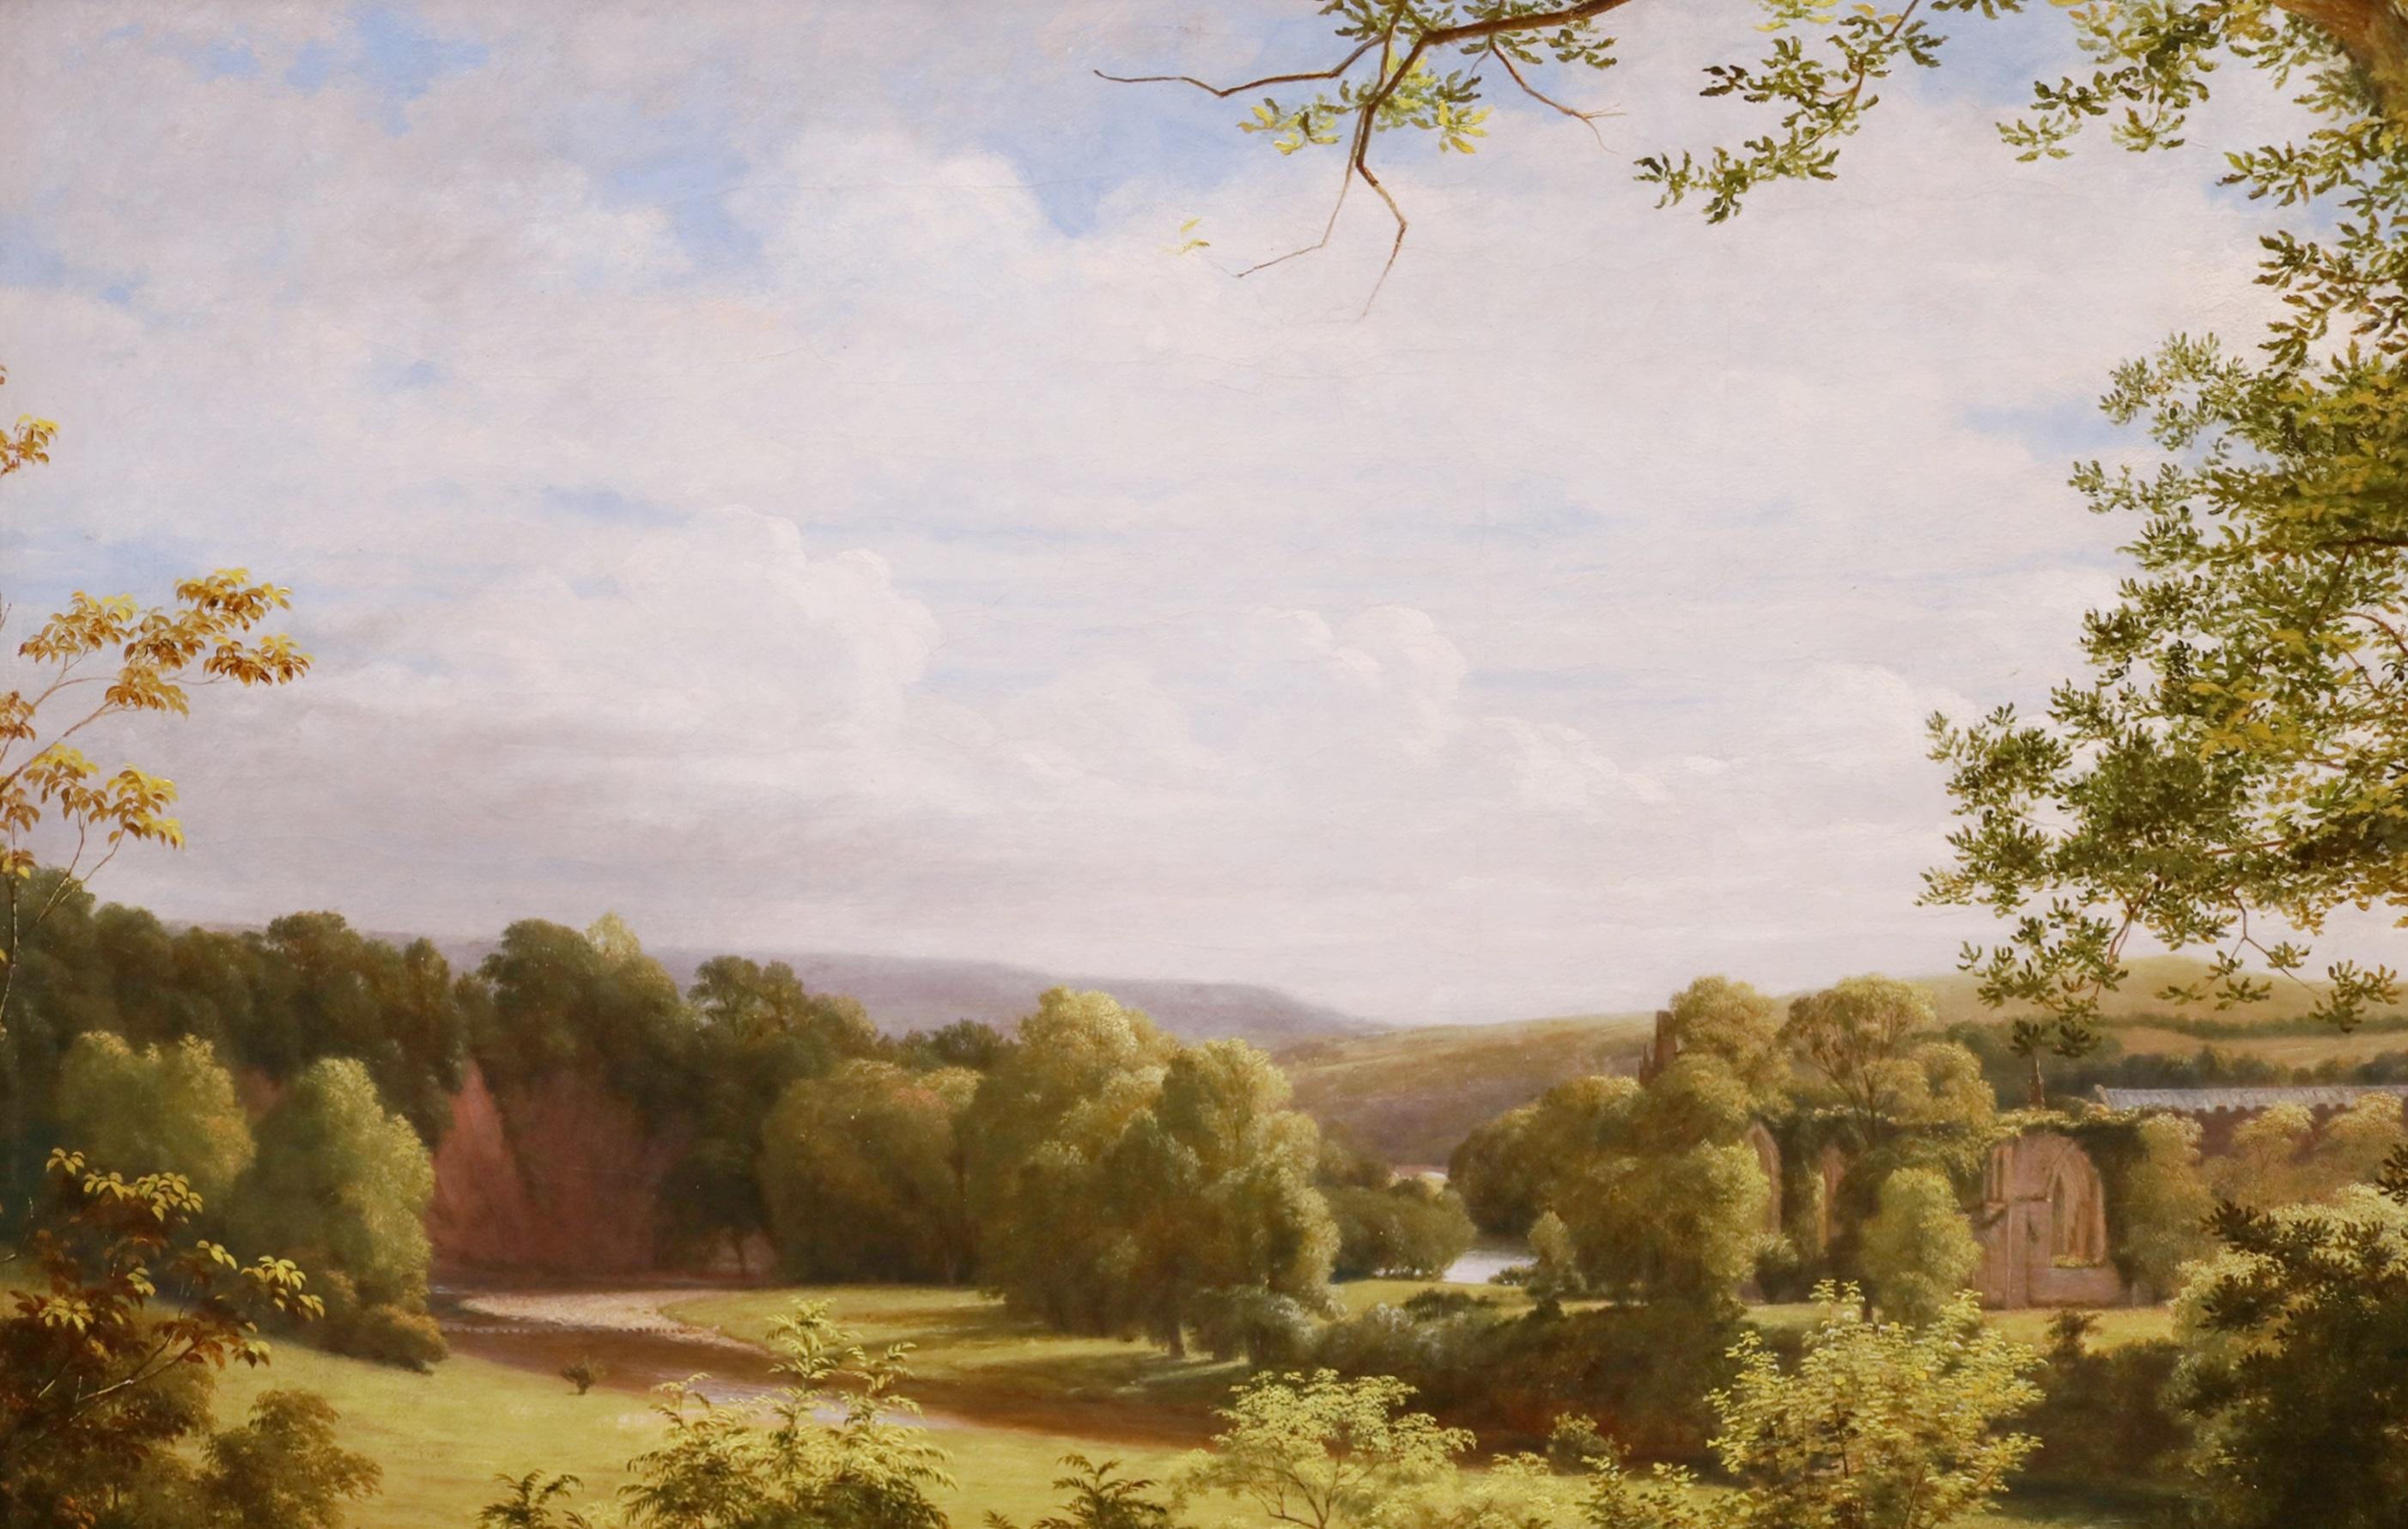 A Day in the County - Large 19th Century Royal Academy Landscape Oil Painting For Sale 5